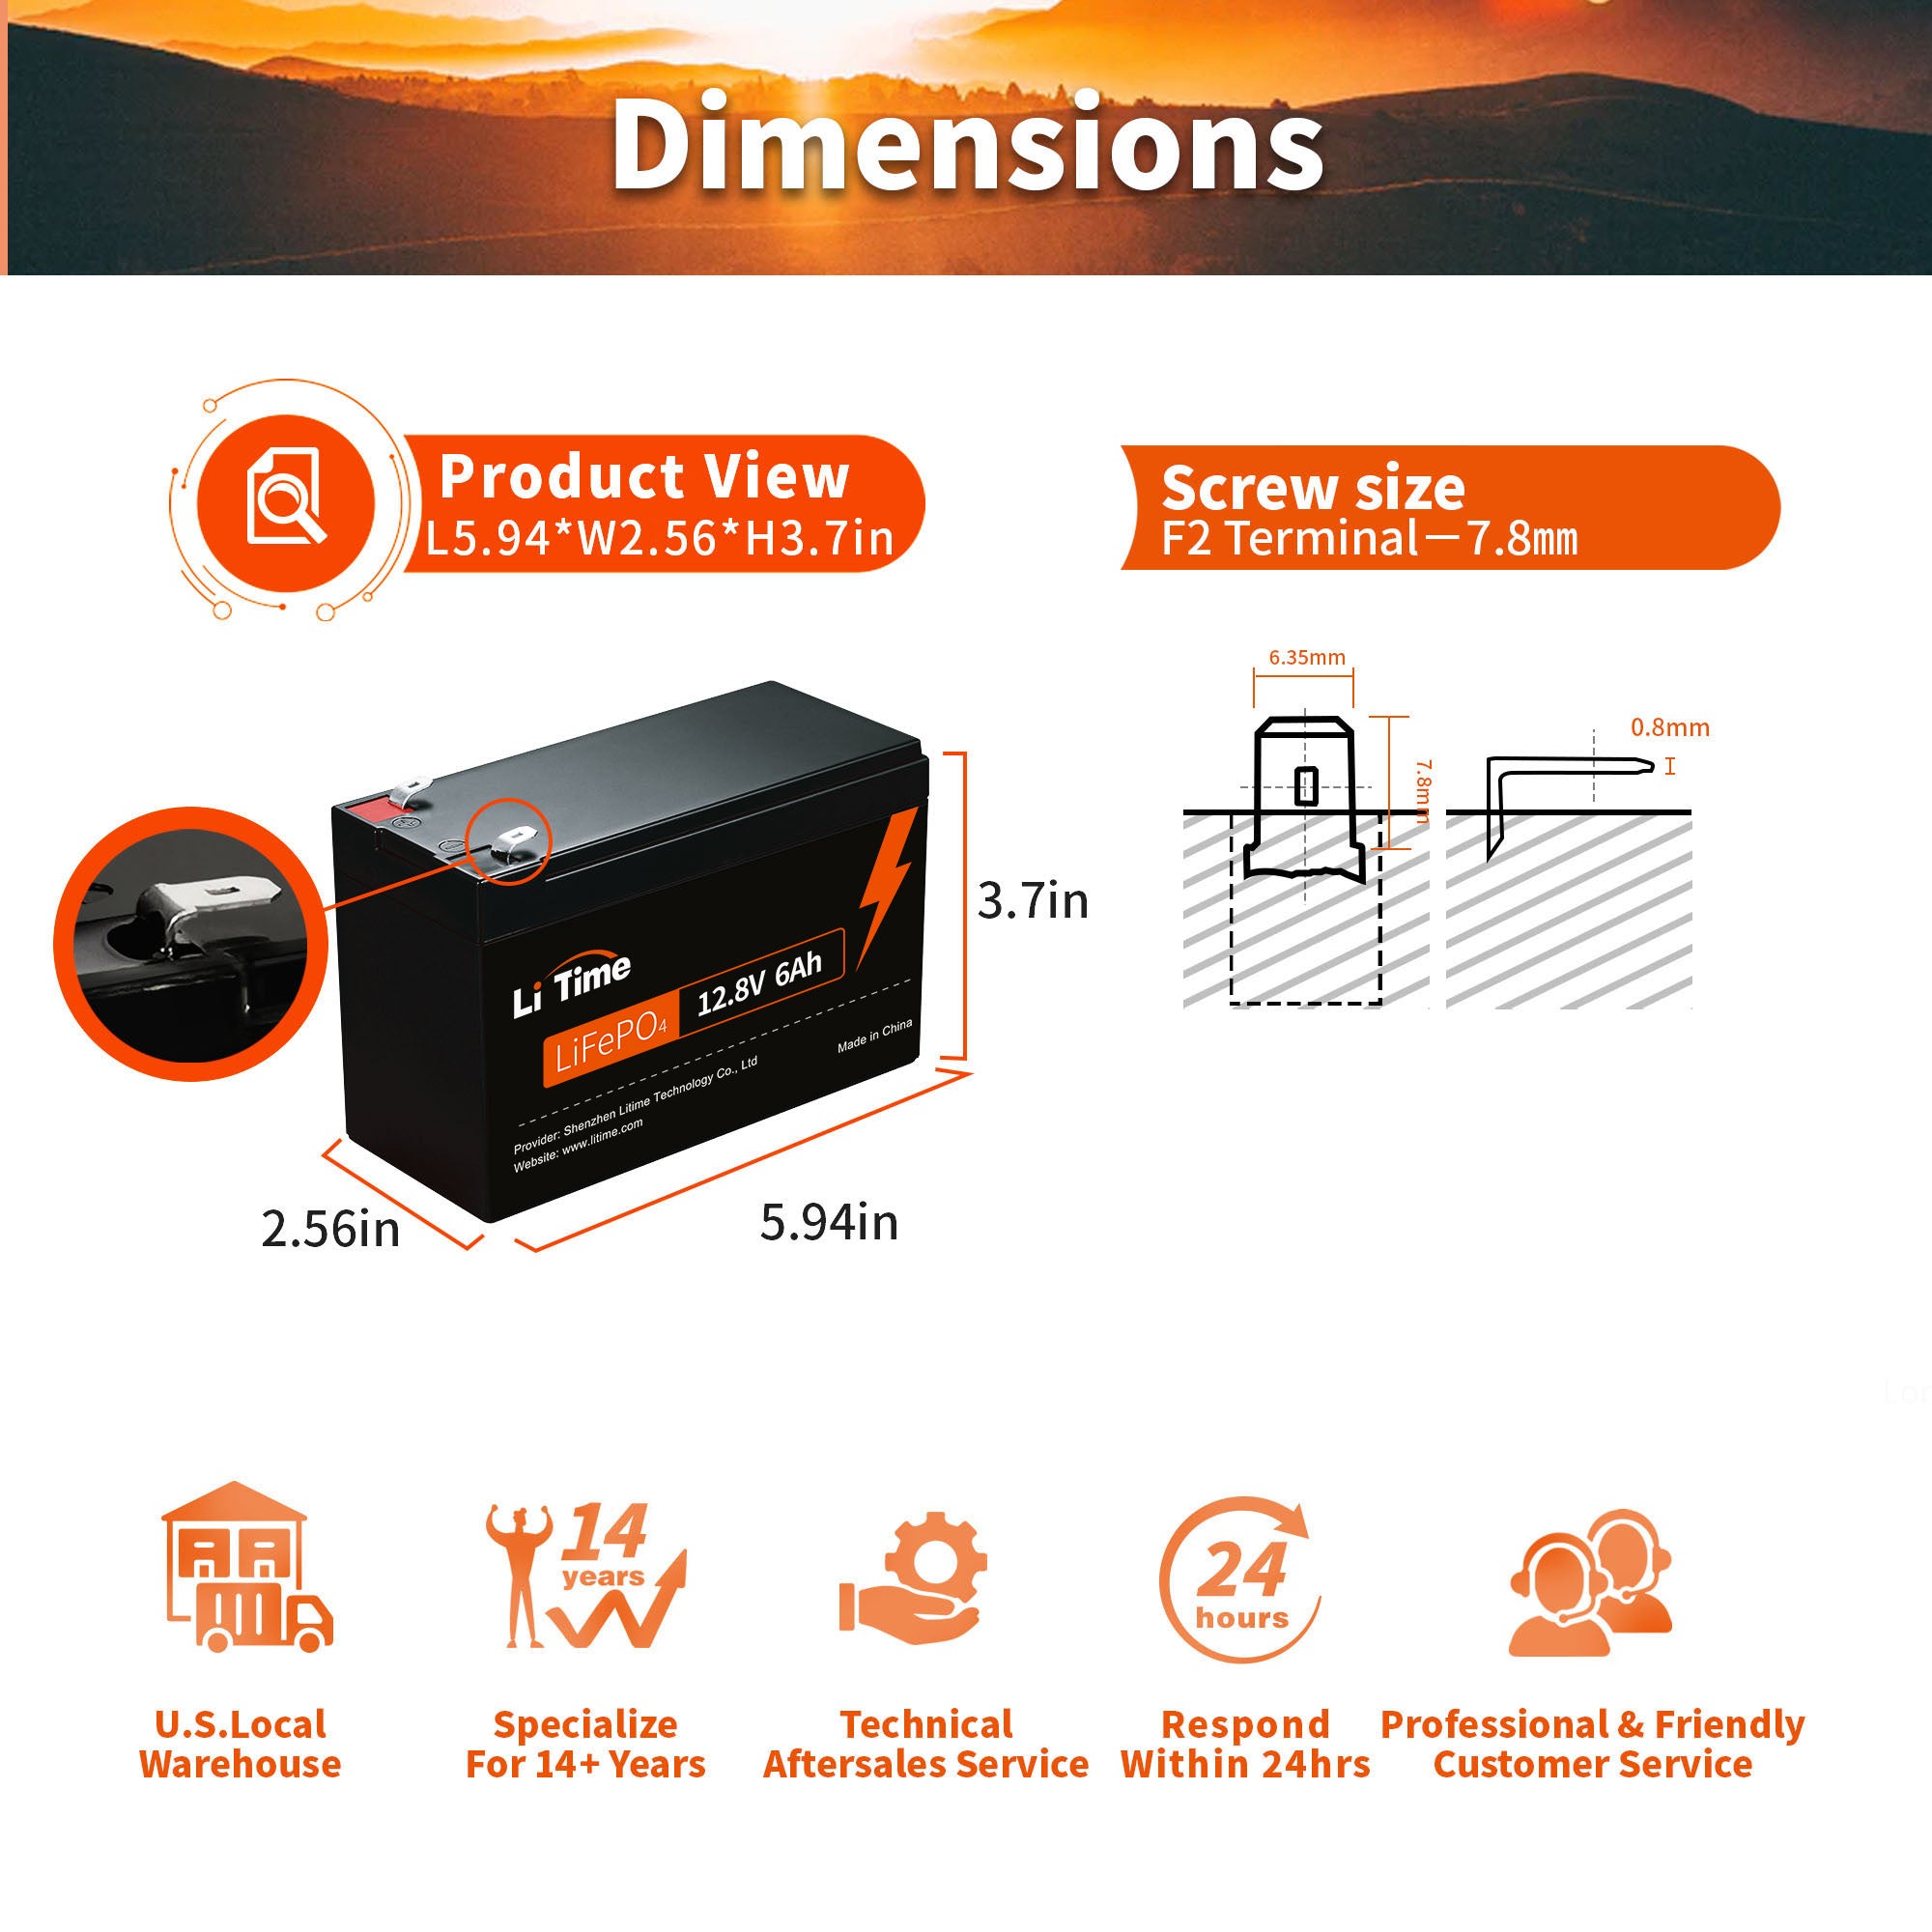 LiTime 12V 6Ah LiFePO4 Lithium Battery, Built-in 6A BMS, 76.8W Output Power